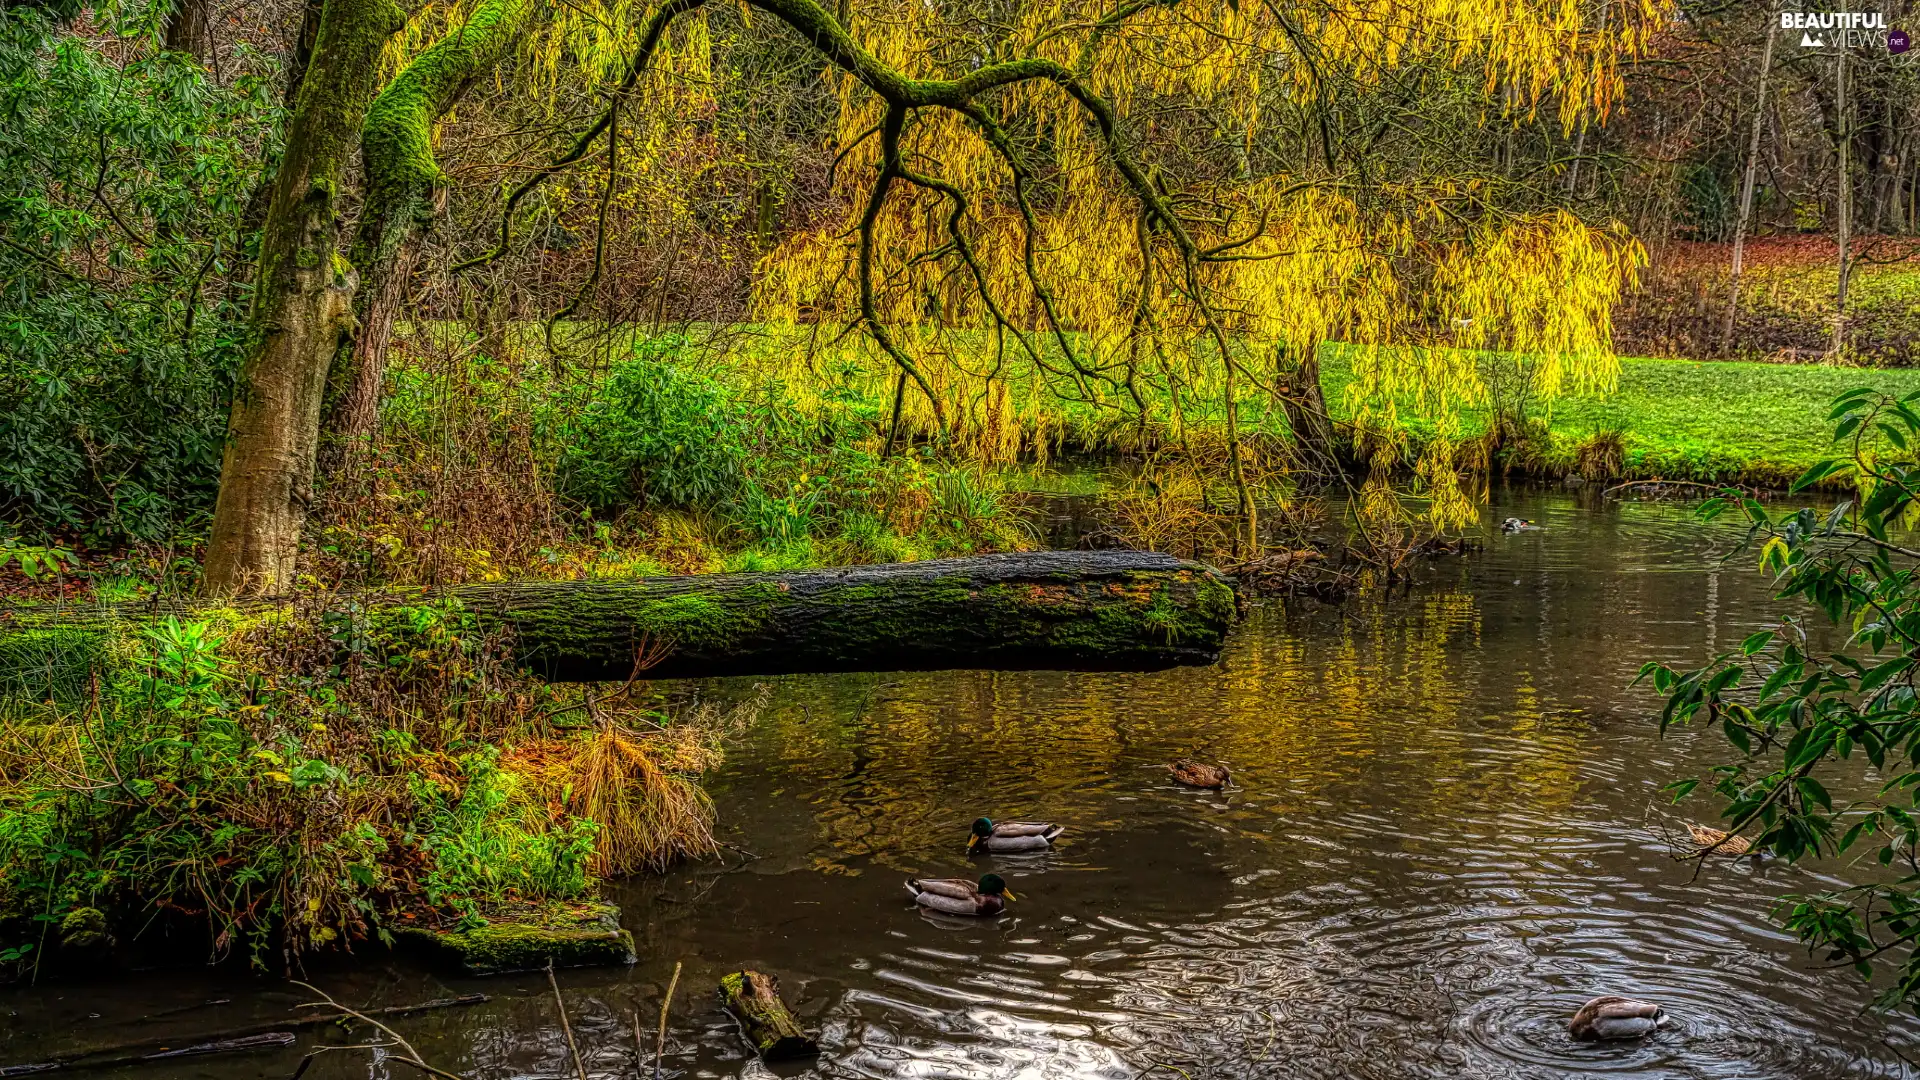 trees, inclined, HDR, branch pics, Spring, Pond - car, Park, ducks